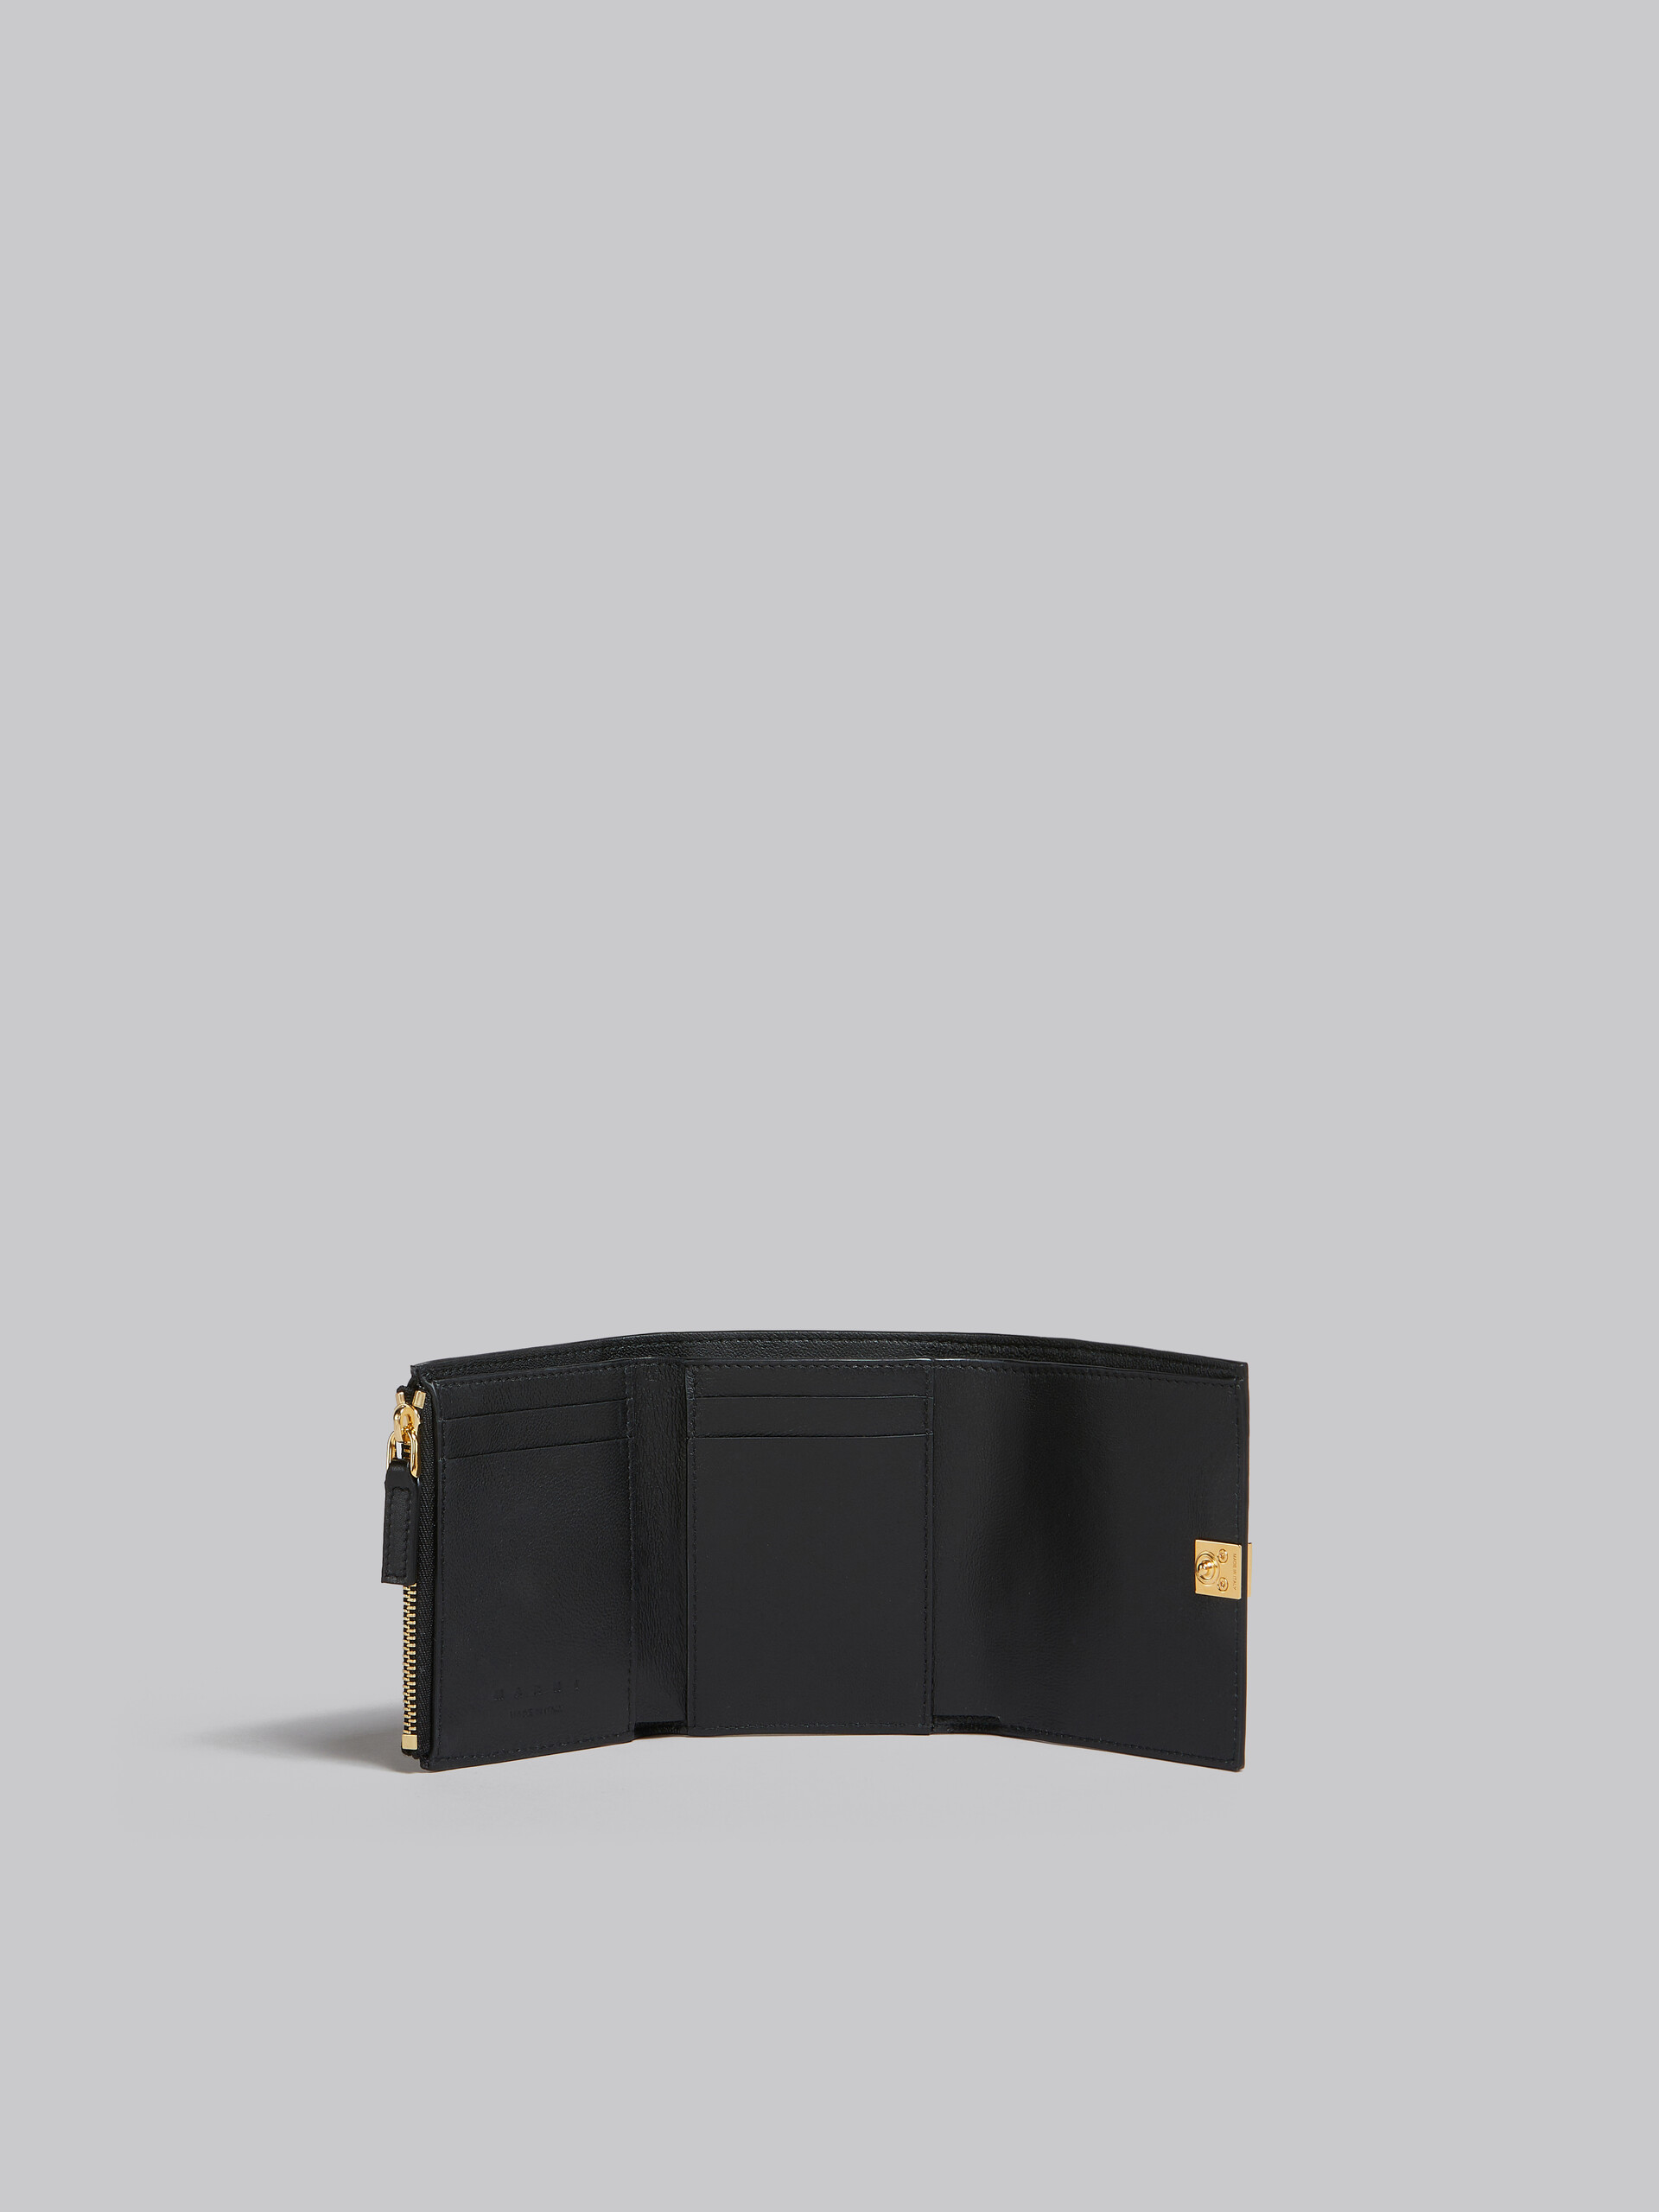 TRIFOLD - Wallets - Image 2